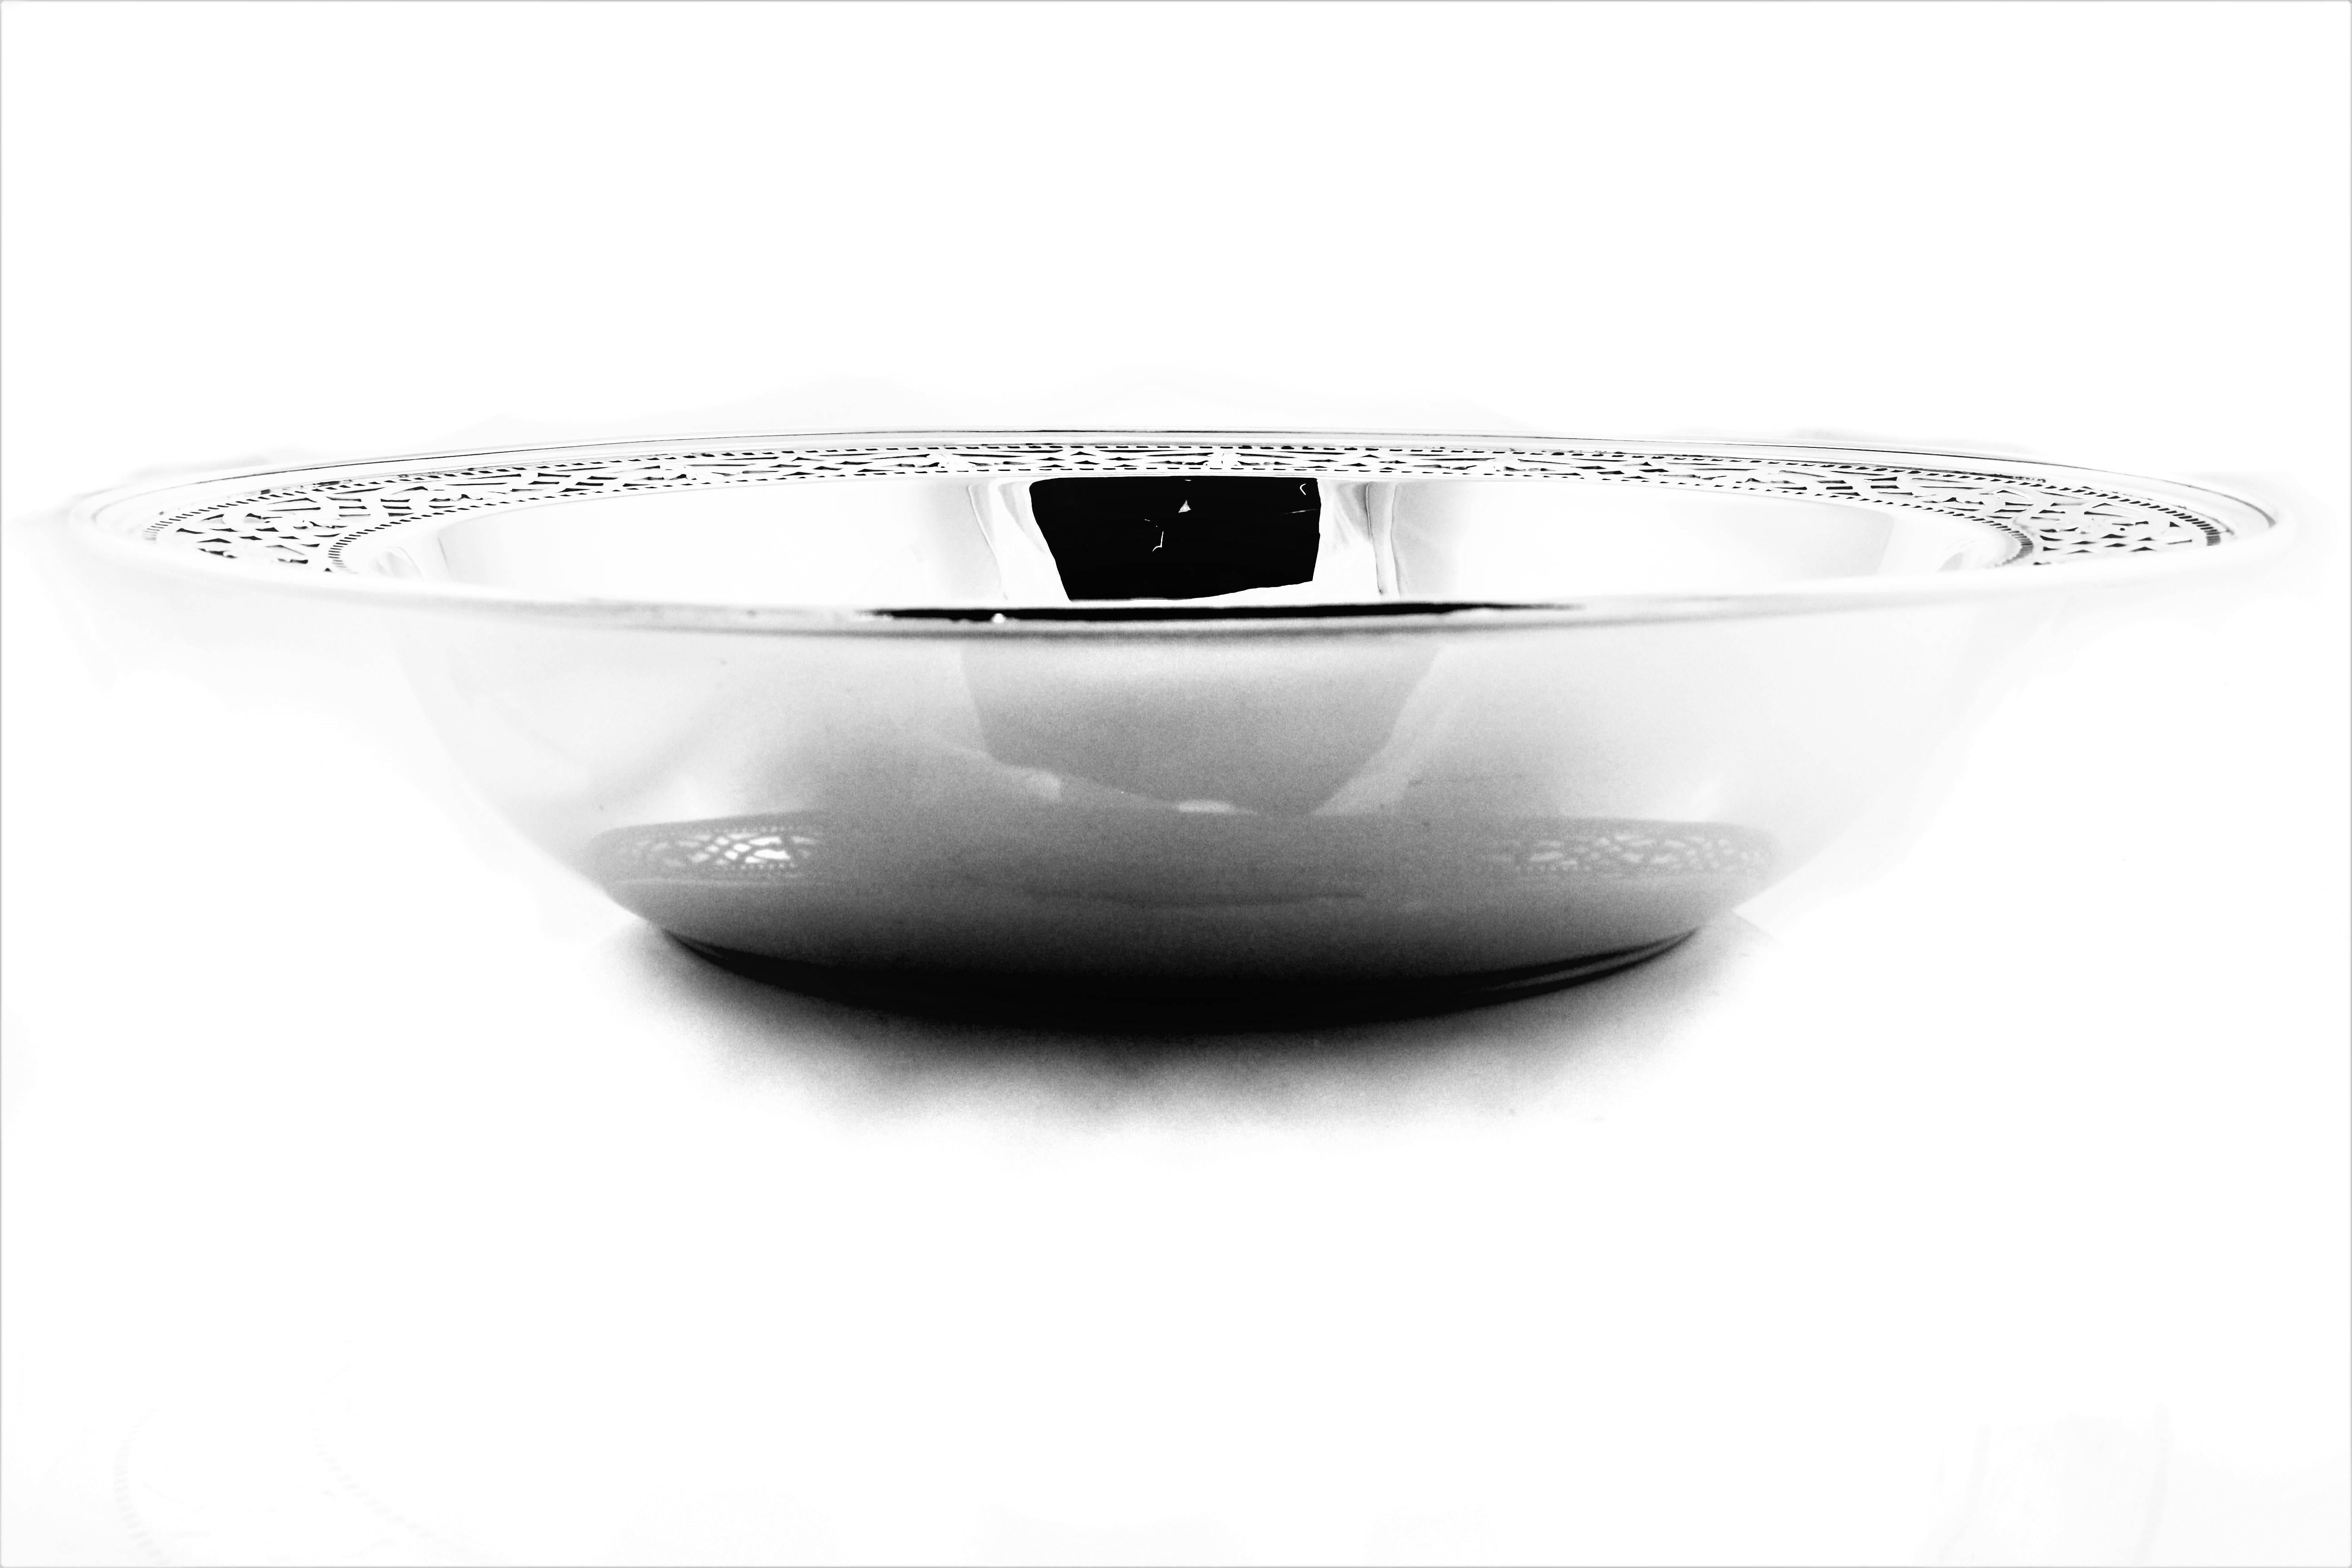 Being offered is a Tiffany & Co bowl with an inch of lattice work around the top. Acting of cut-out squares runs both above and under the larger lattice work. In the center a monogrammed 